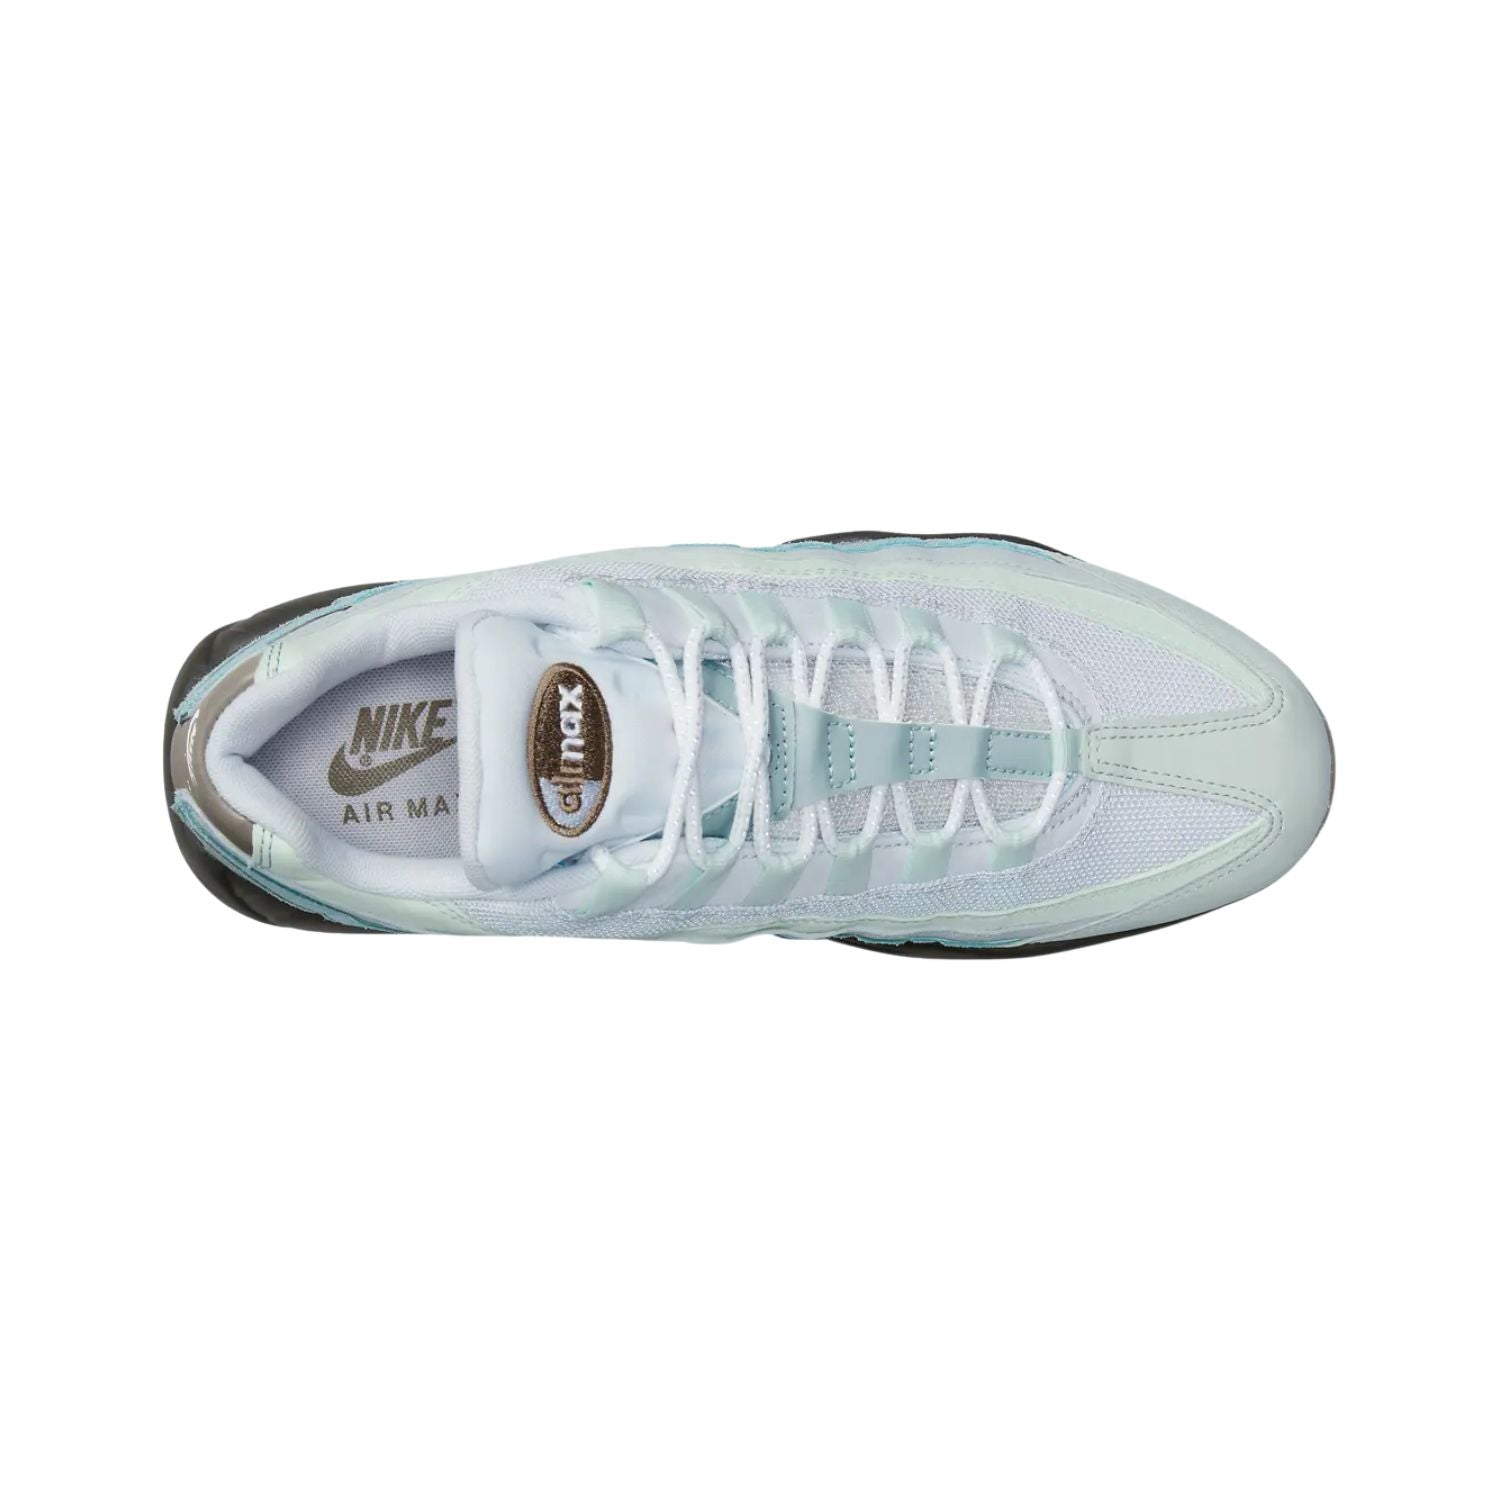 Nike Air Max 95 Mens Style : Dq9468-355 - NY Tent Sale